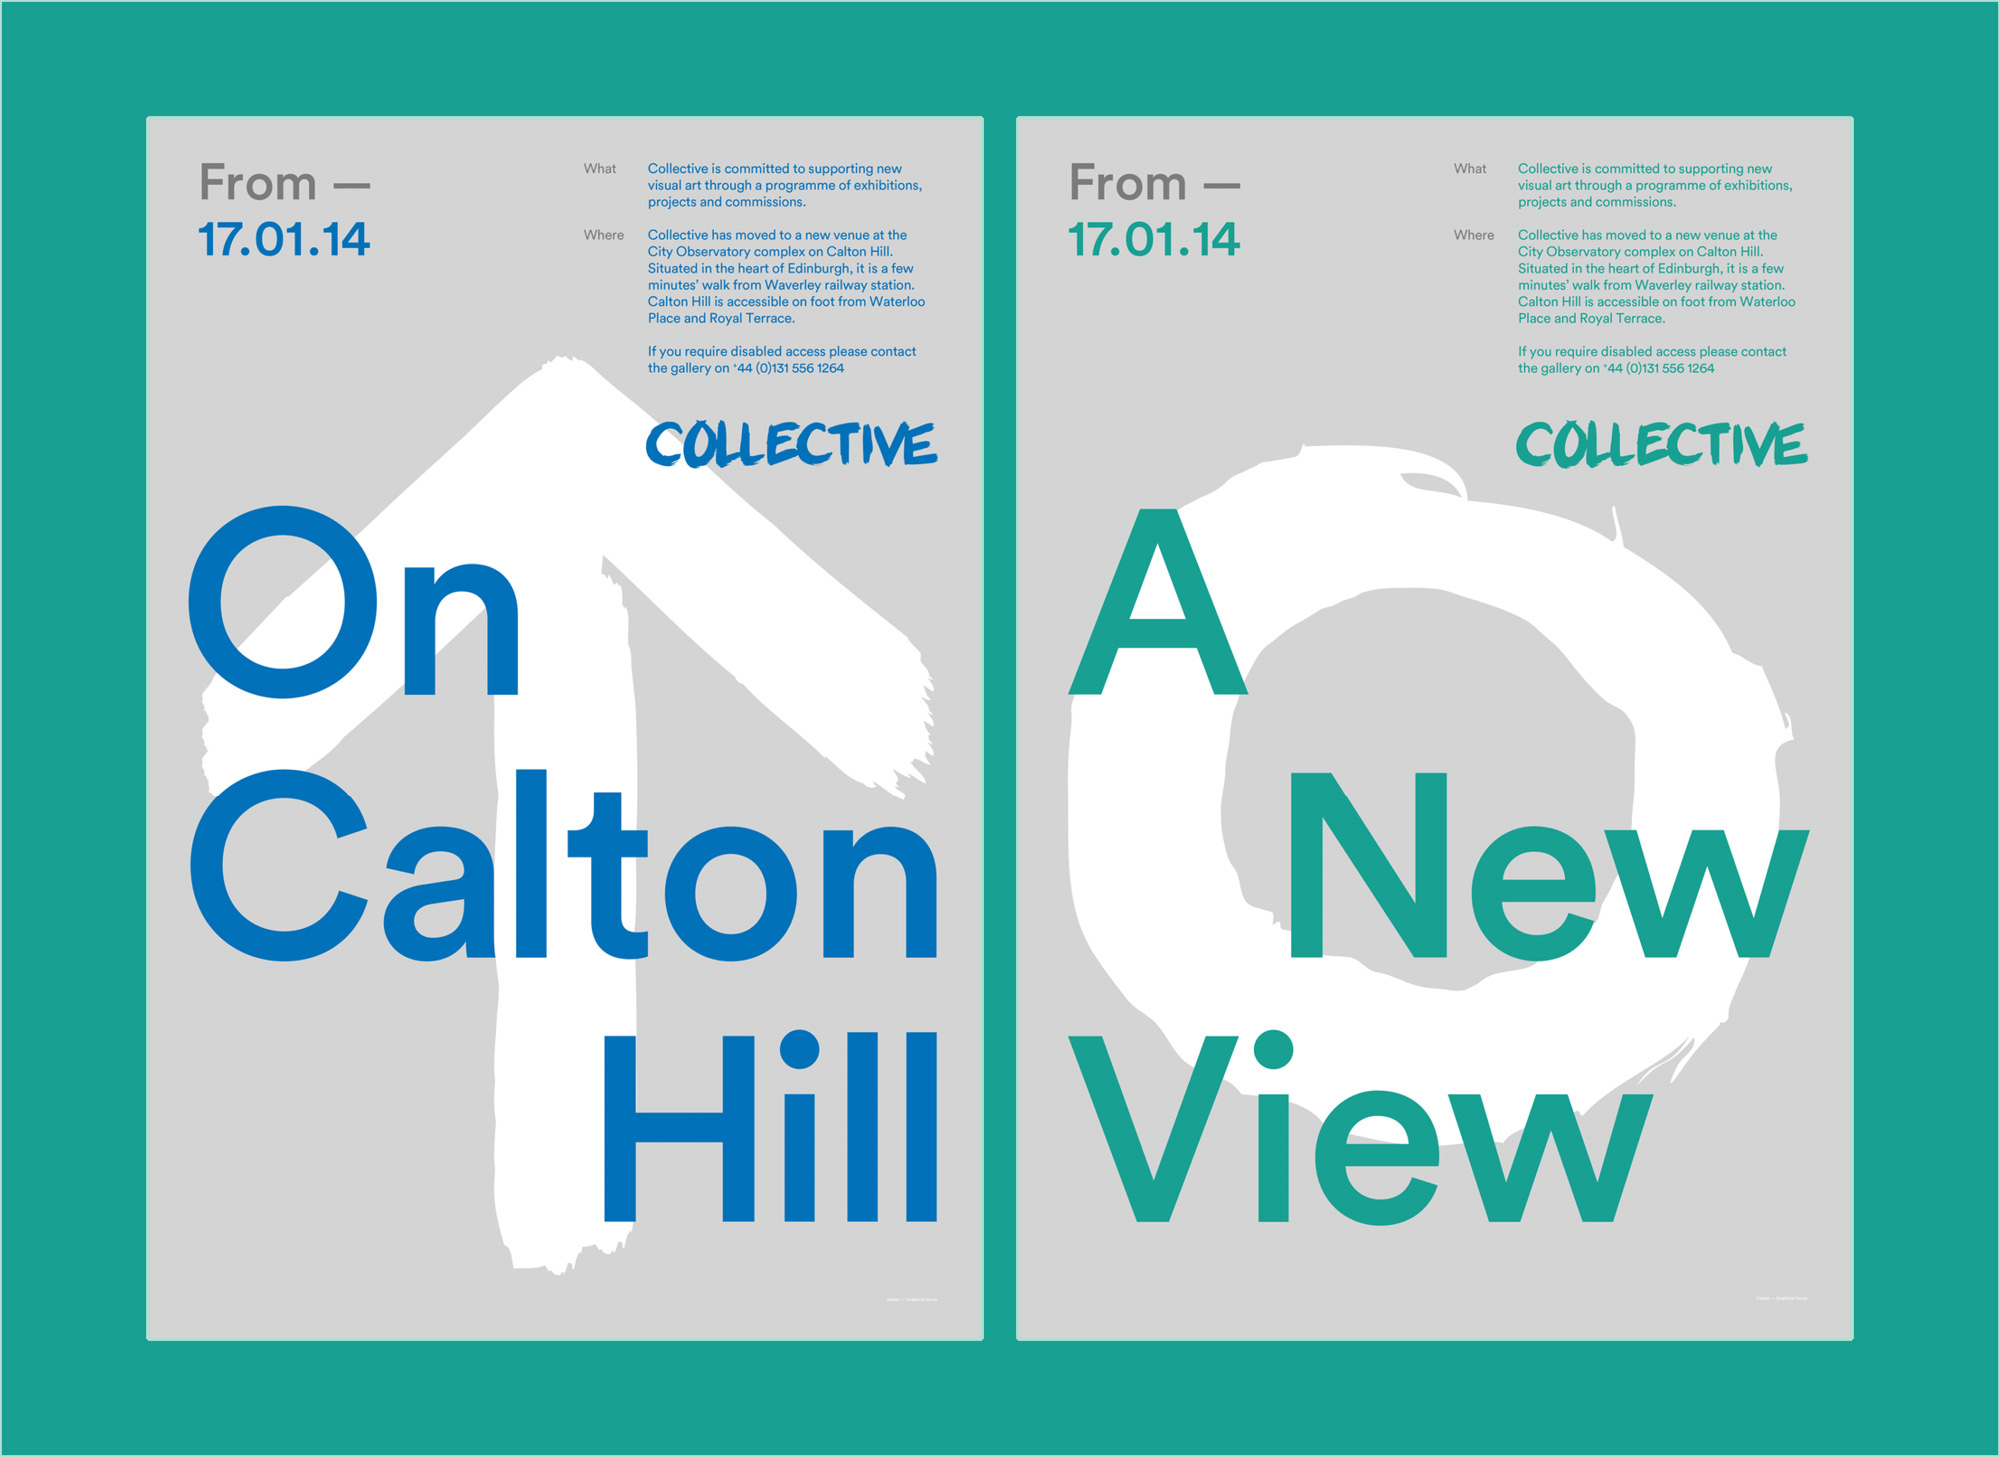 Two poster designs for Collective Gallery